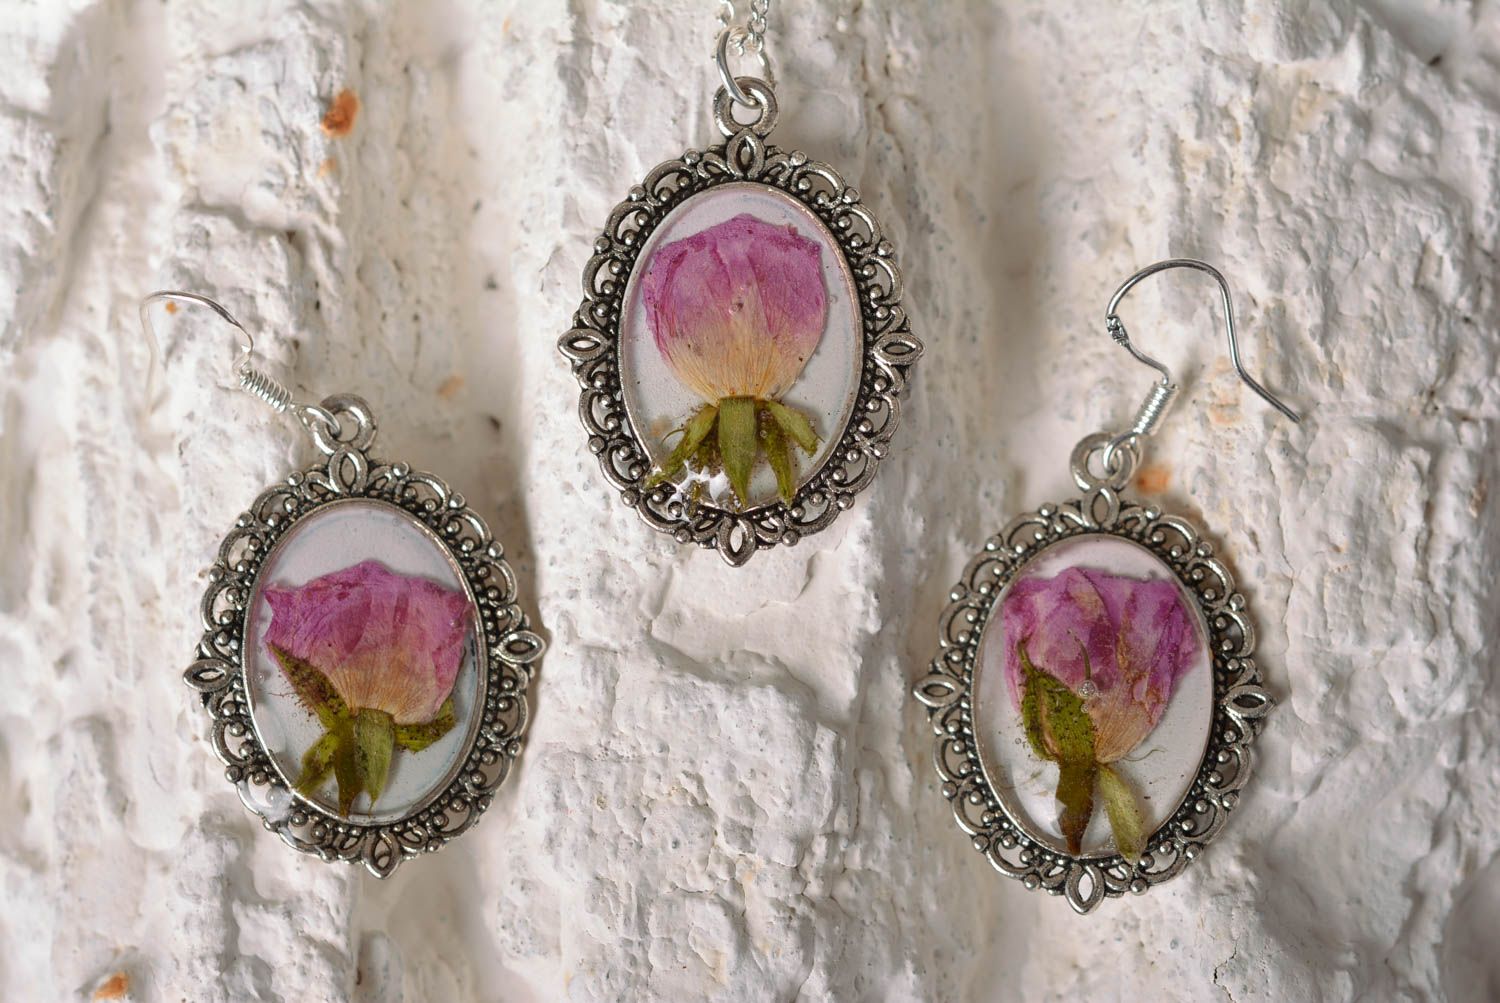 Handmade pendant bijouterie with epoxy resin earings with rose designer gift photo 1